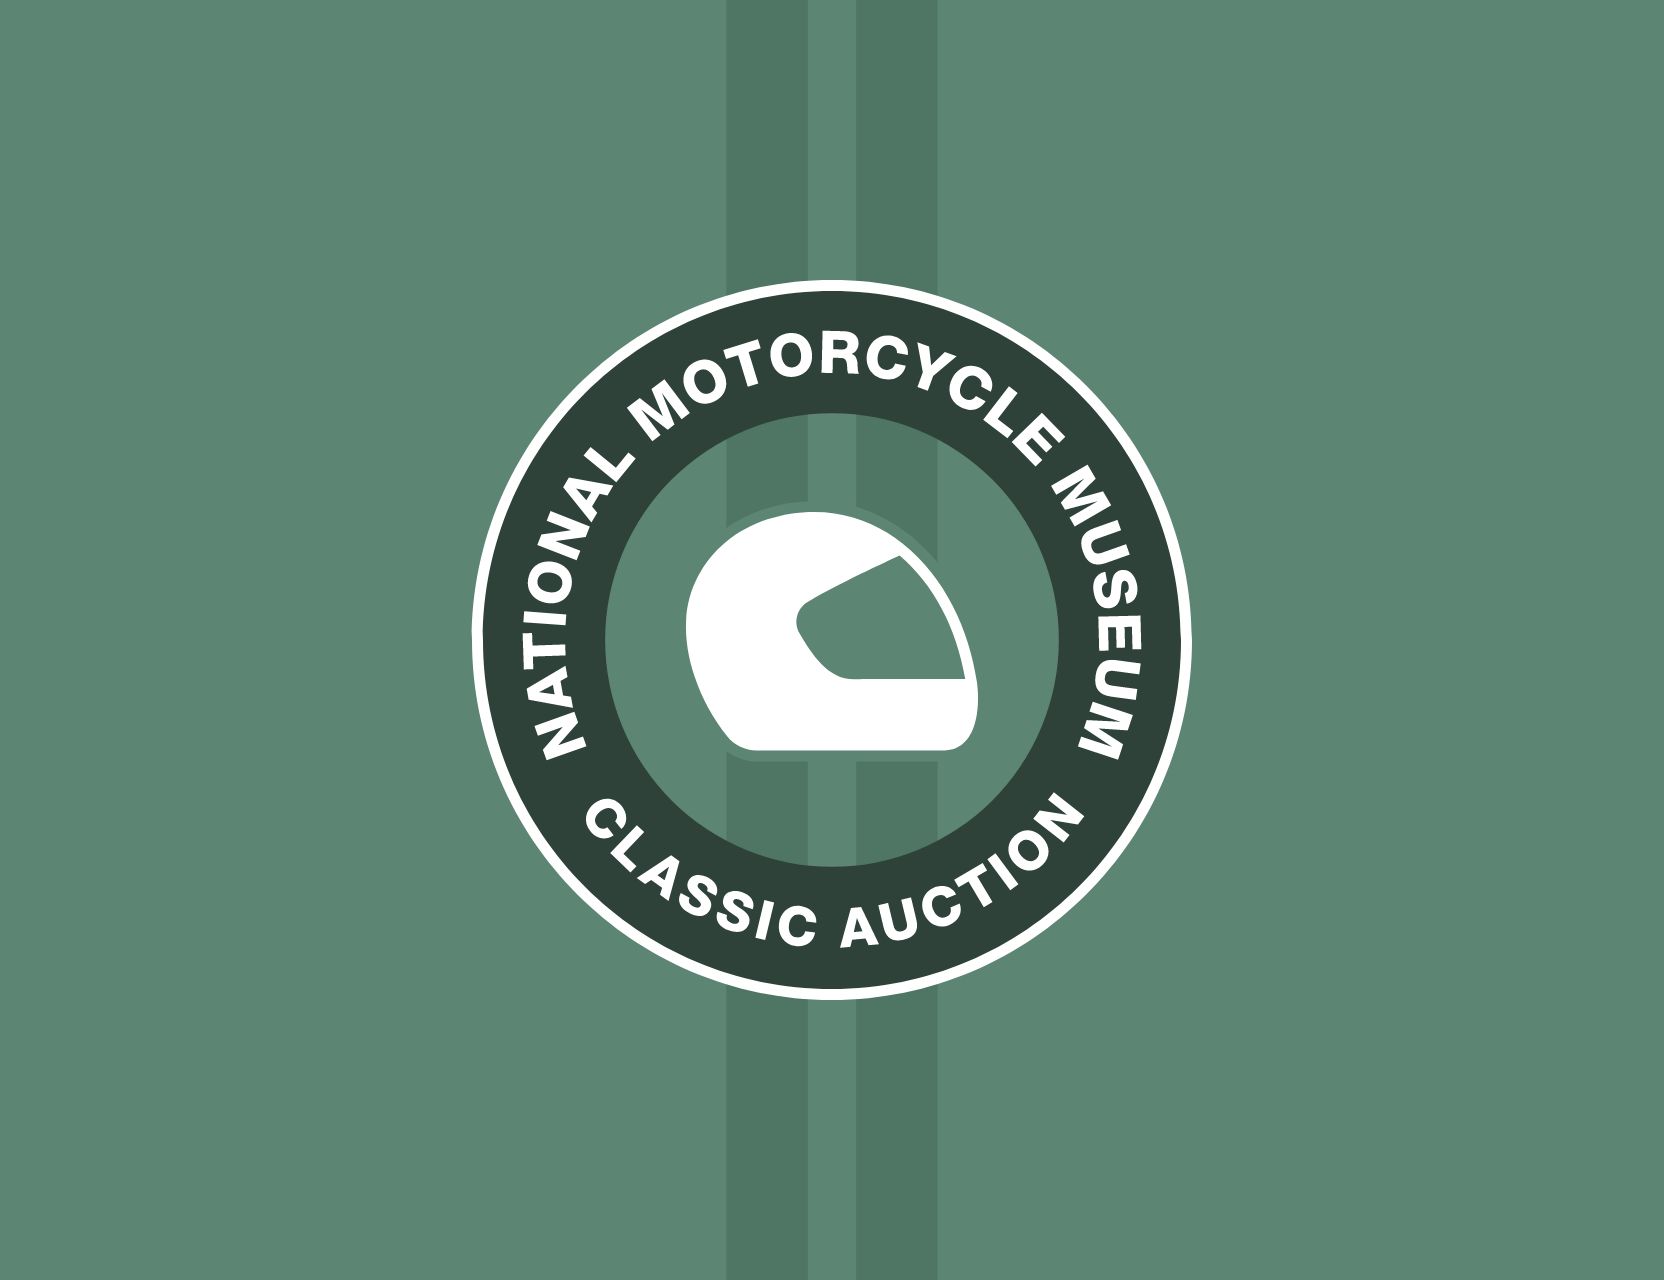 National Motorcycle Museum | Solihull, West Midlands